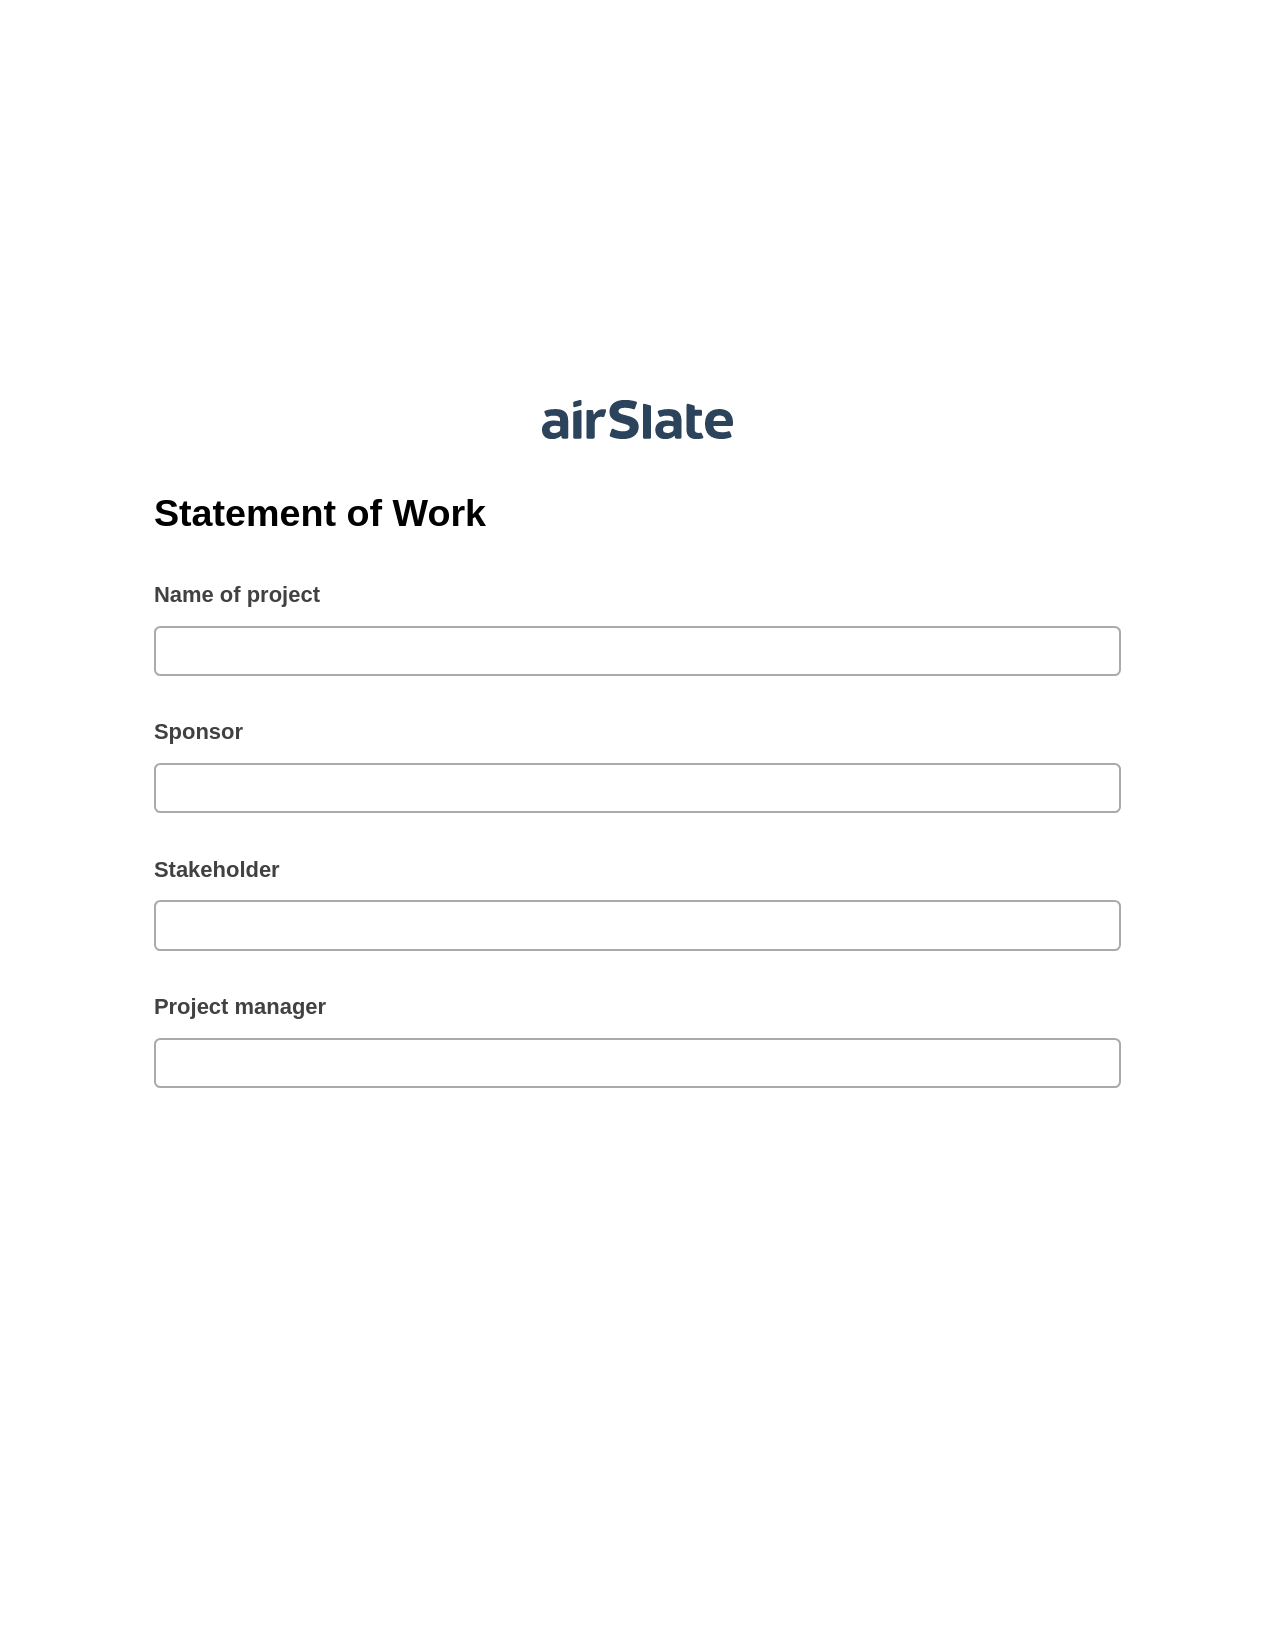 Statement of Work Pre-fill from Google Sheet Dropdown Options Bot, Email Notification Bot, Export to Google Sheet Bot